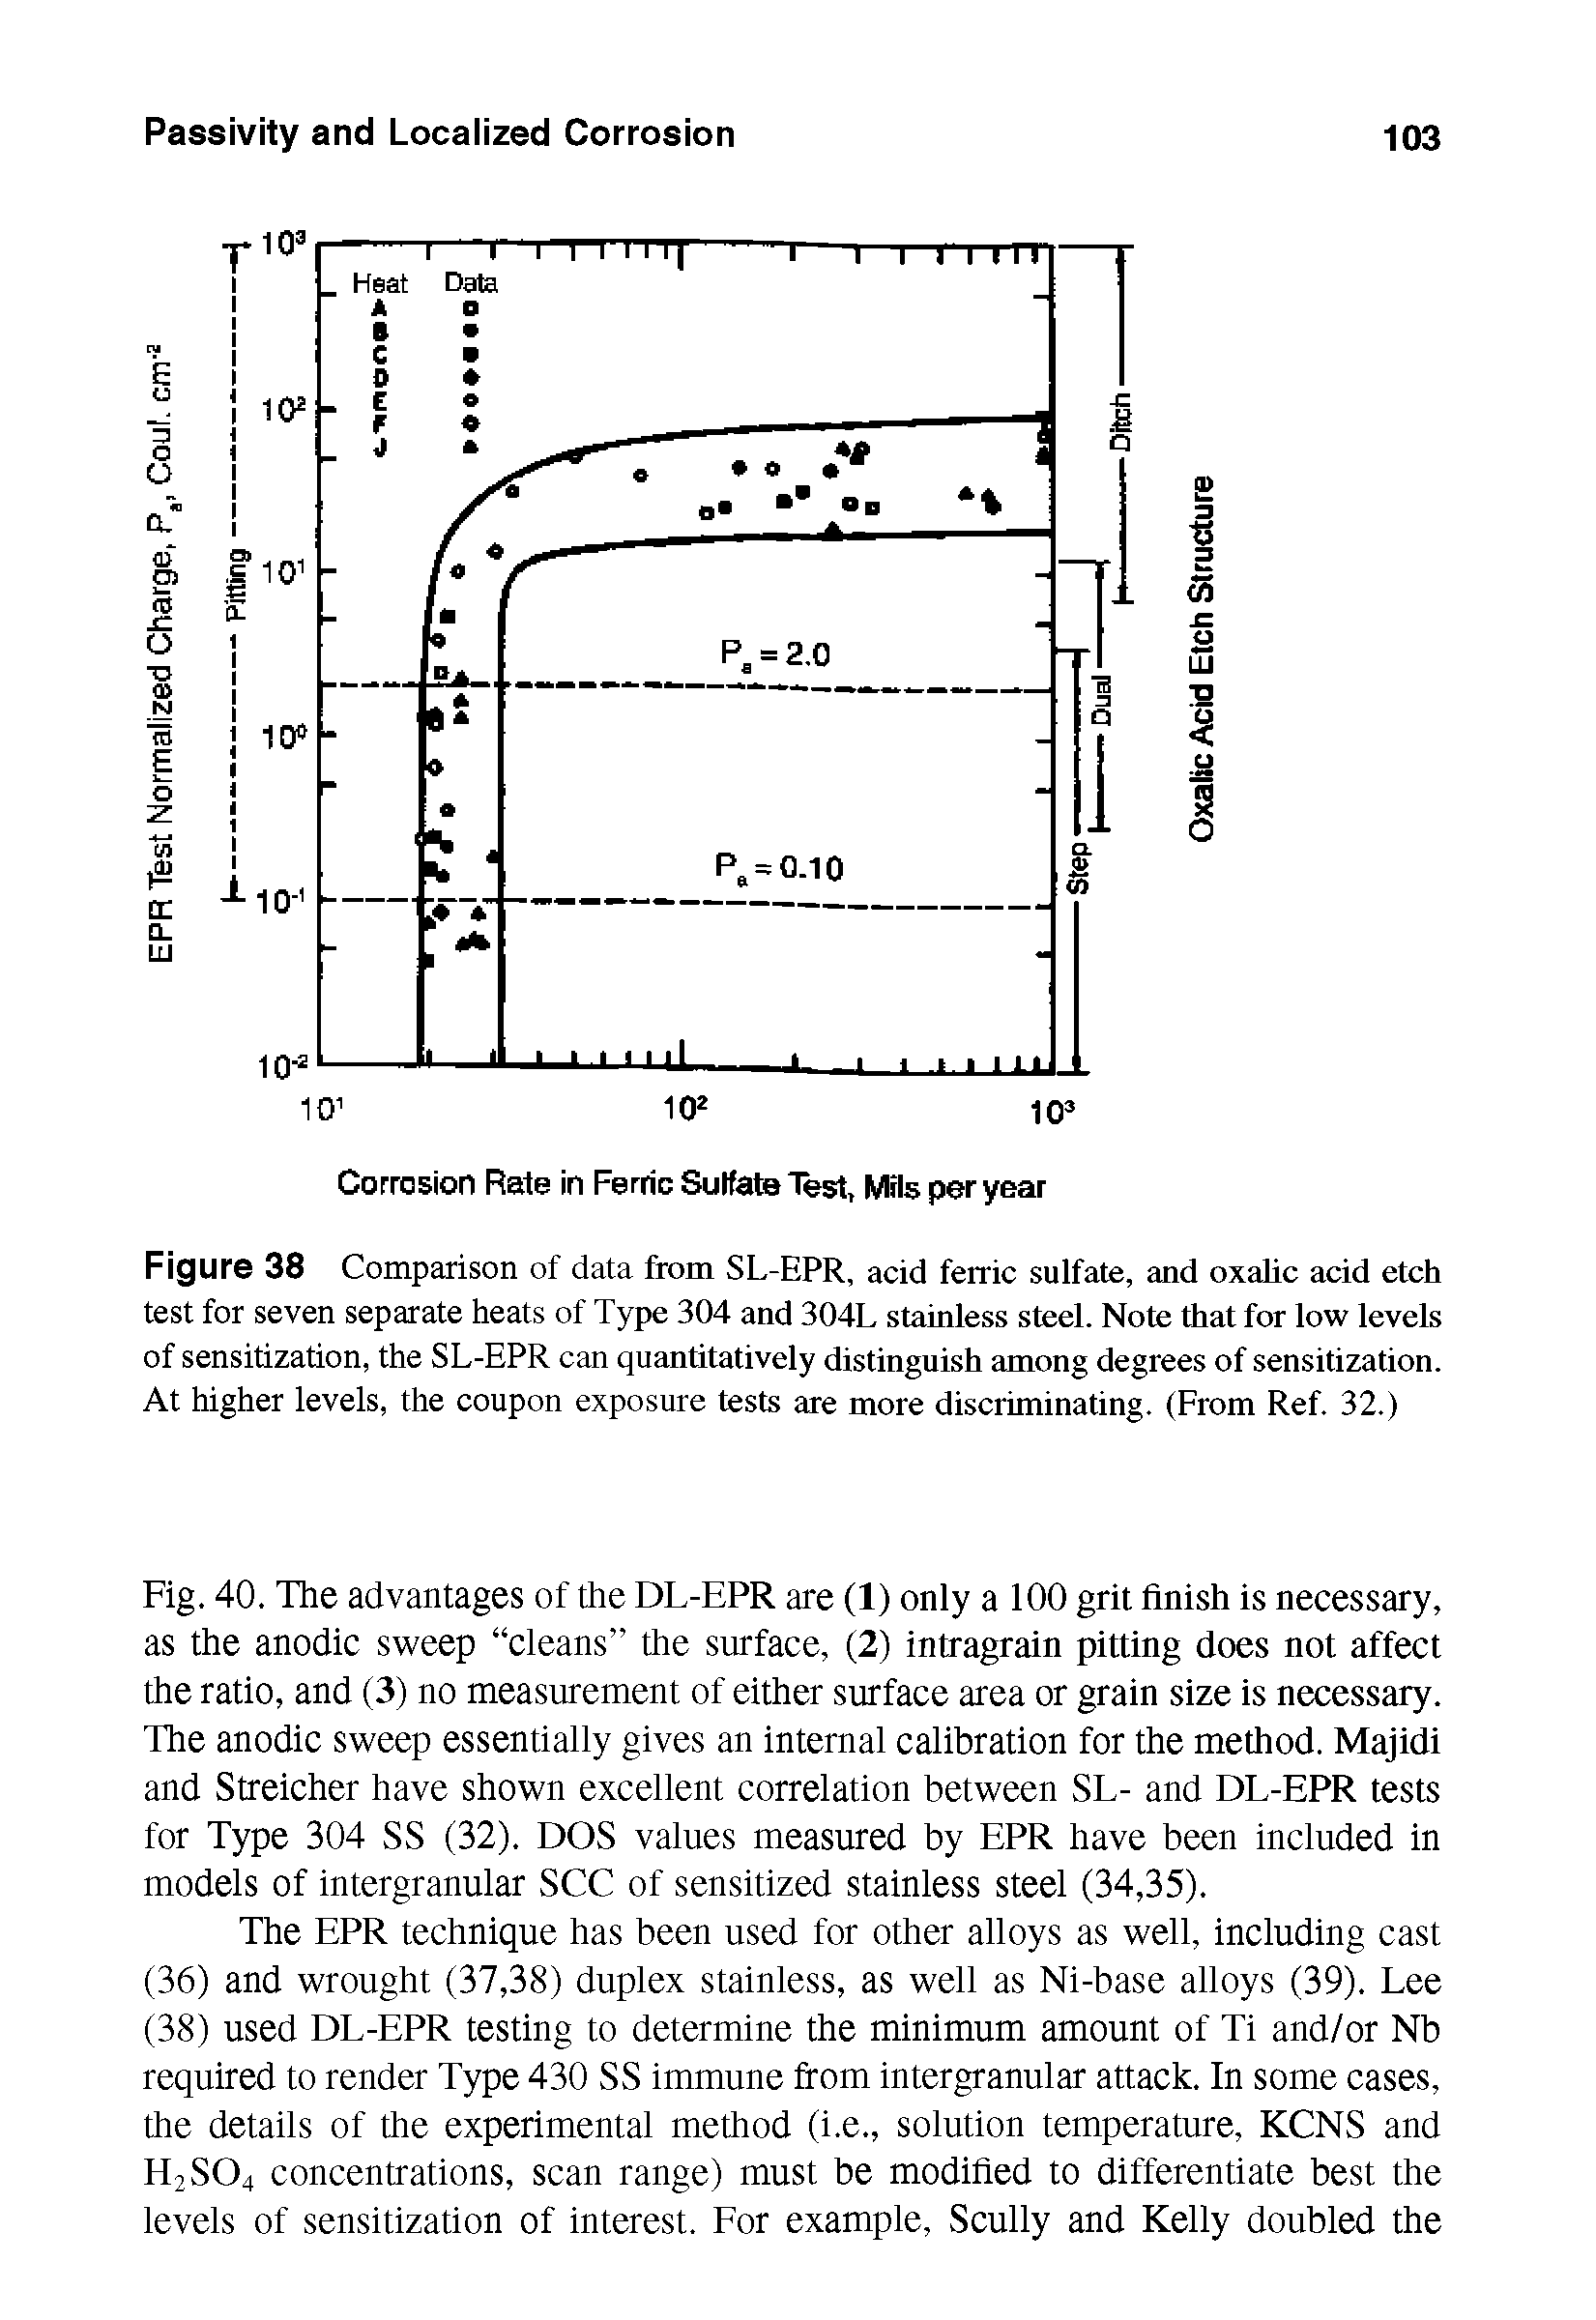 Fig. 40. The advantages of the DL-EPR are (1) only a 100 grit finish is necessary, as the anodic sweep cleans the surface, (2) intragrain pitting does not affect the ratio, and (3) no measurement of either surface area or grain size is necessary. The anodic sweep essentially gives an internal calibration for the method. Majidi and Streicher have shown excellent correlation between SL- and DL-EPR tests for Type 304 SS (32). DOS values measured by EPR have been included in models of intergranular SCC of sensitized stainless steel (34,35).